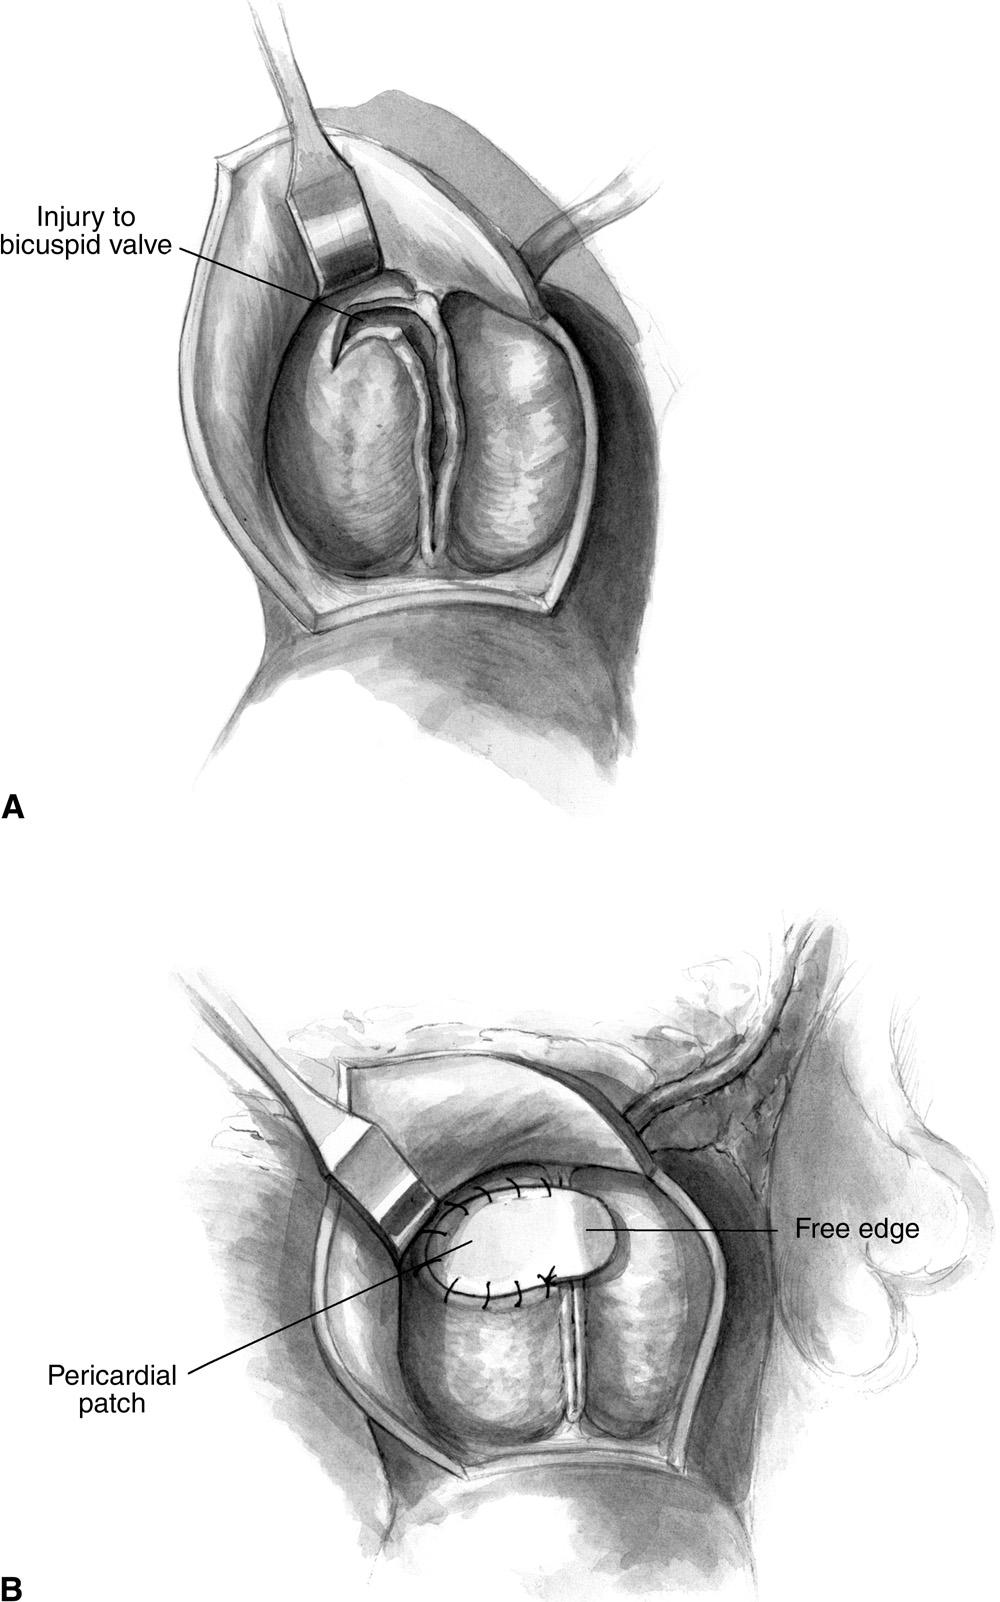 Aortic valve repair in children 245 Figure 2 This figure depicts the typical findings in a child with aortic stenosis who has previously undergone balloon aortic valvulotomy and is suffering from